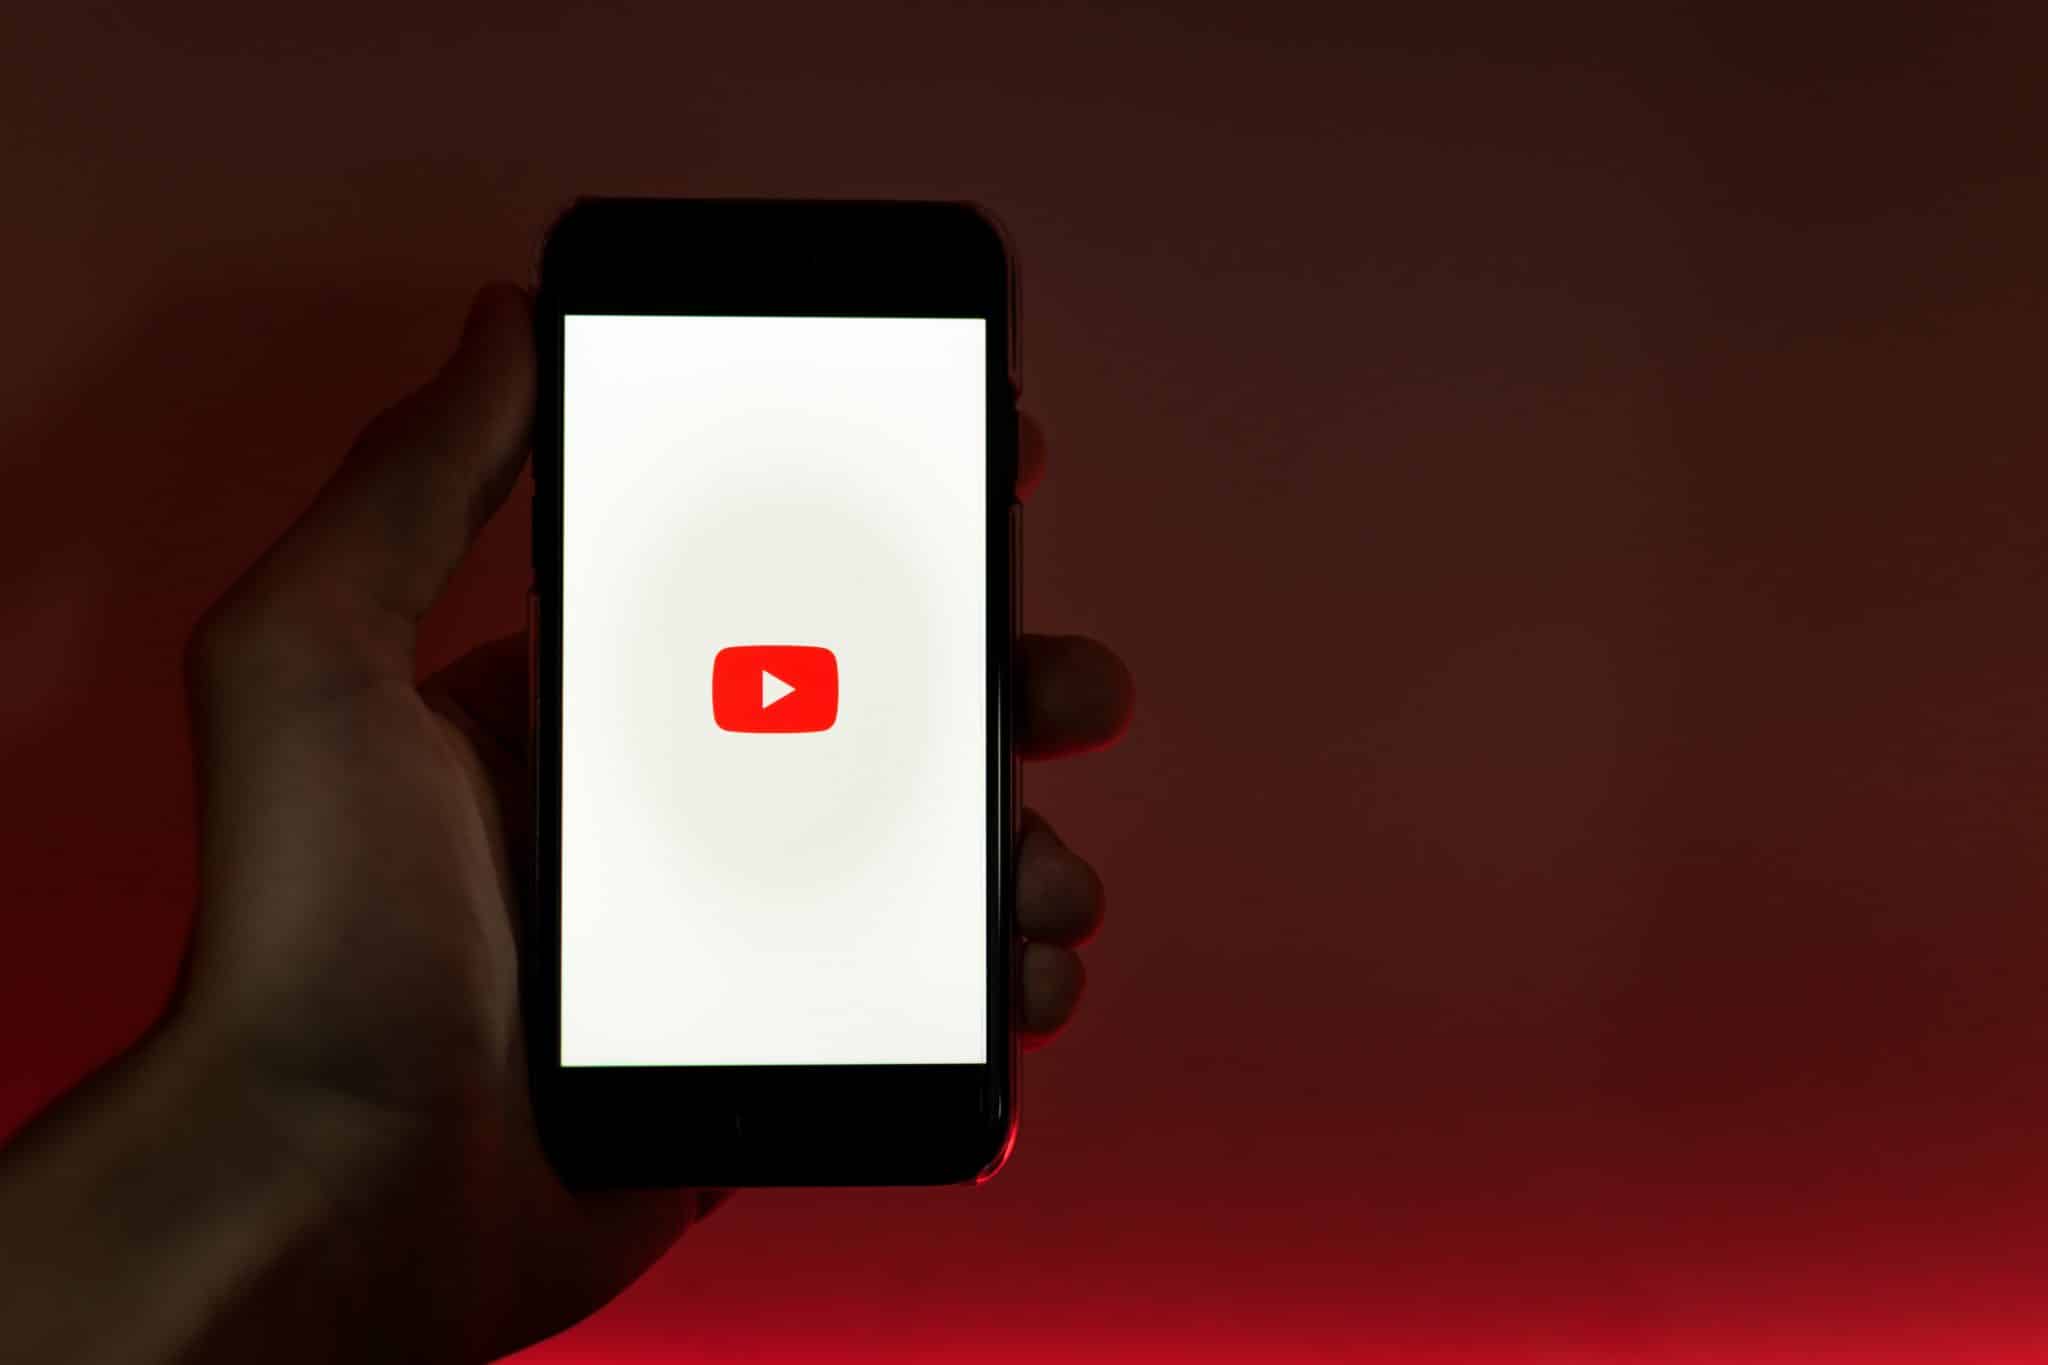 Photo of a person holding a smart phone showing the YouTube logo.